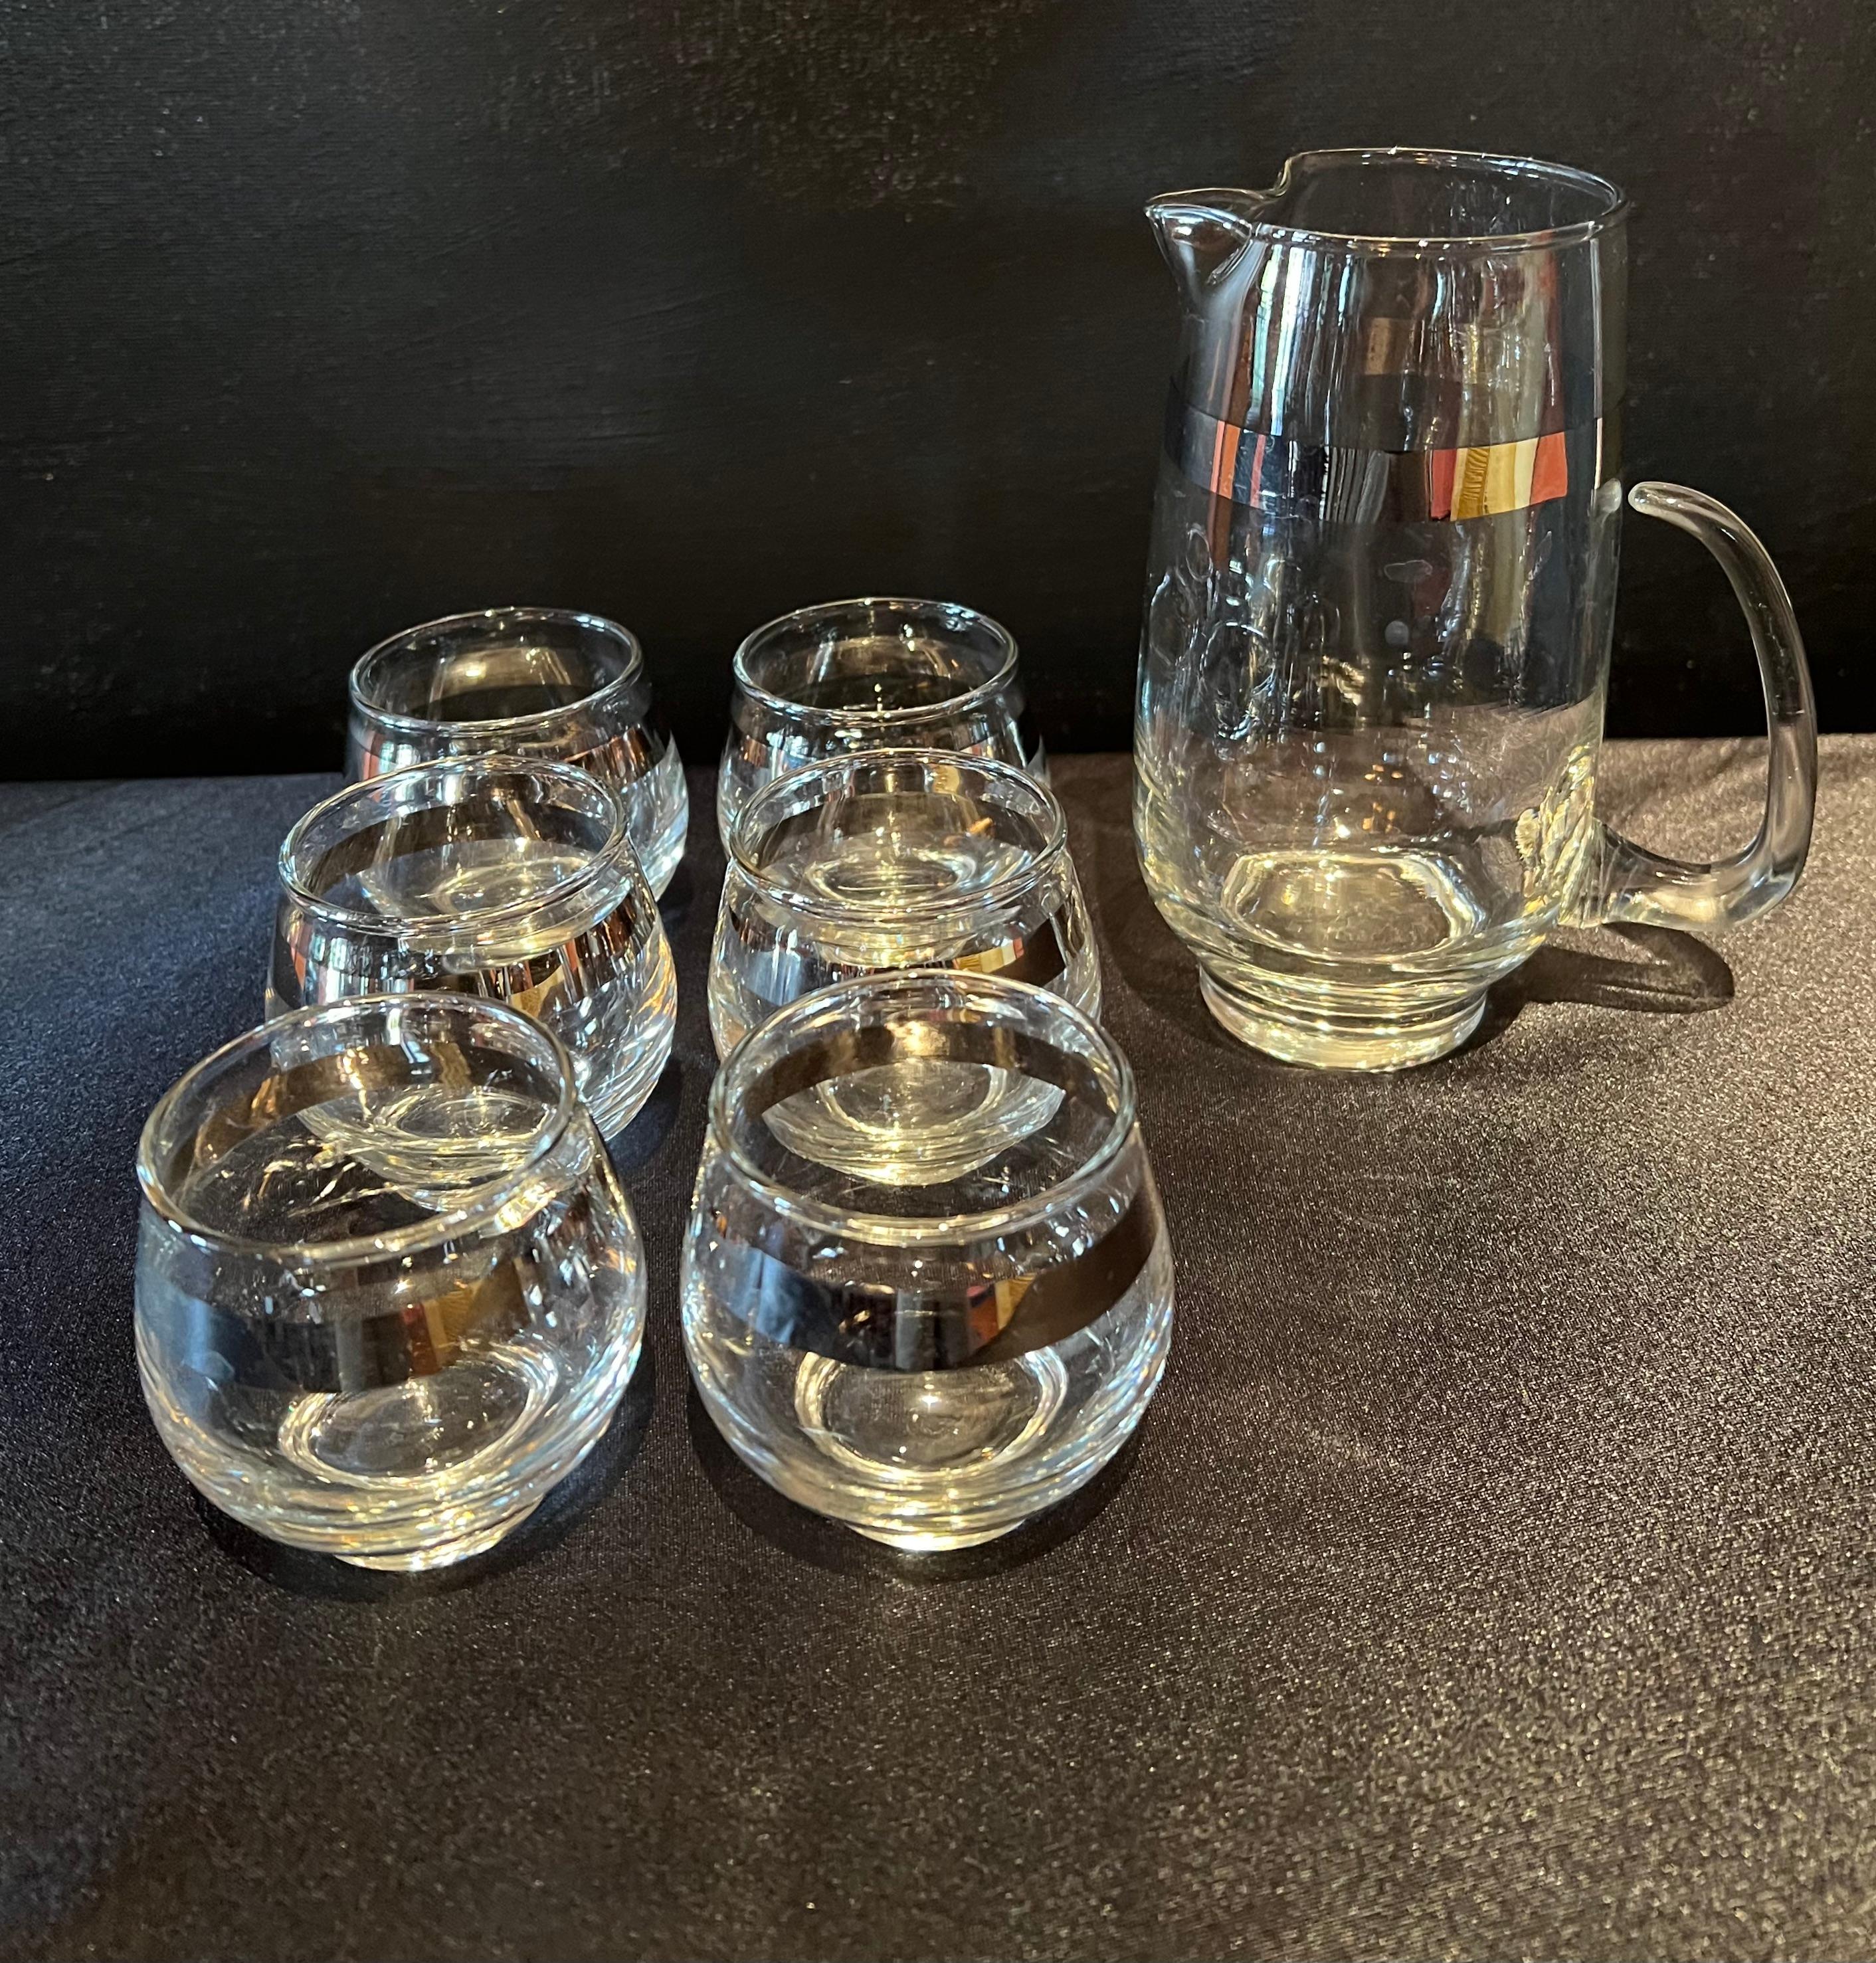 A great cocktail Martini set with 6 matching glasses. The glasses greatly resemble Dorothy Thorpe and actually could be... very similar to the rolly polly glass made popular on Mad Men.

The Pitcher is 5